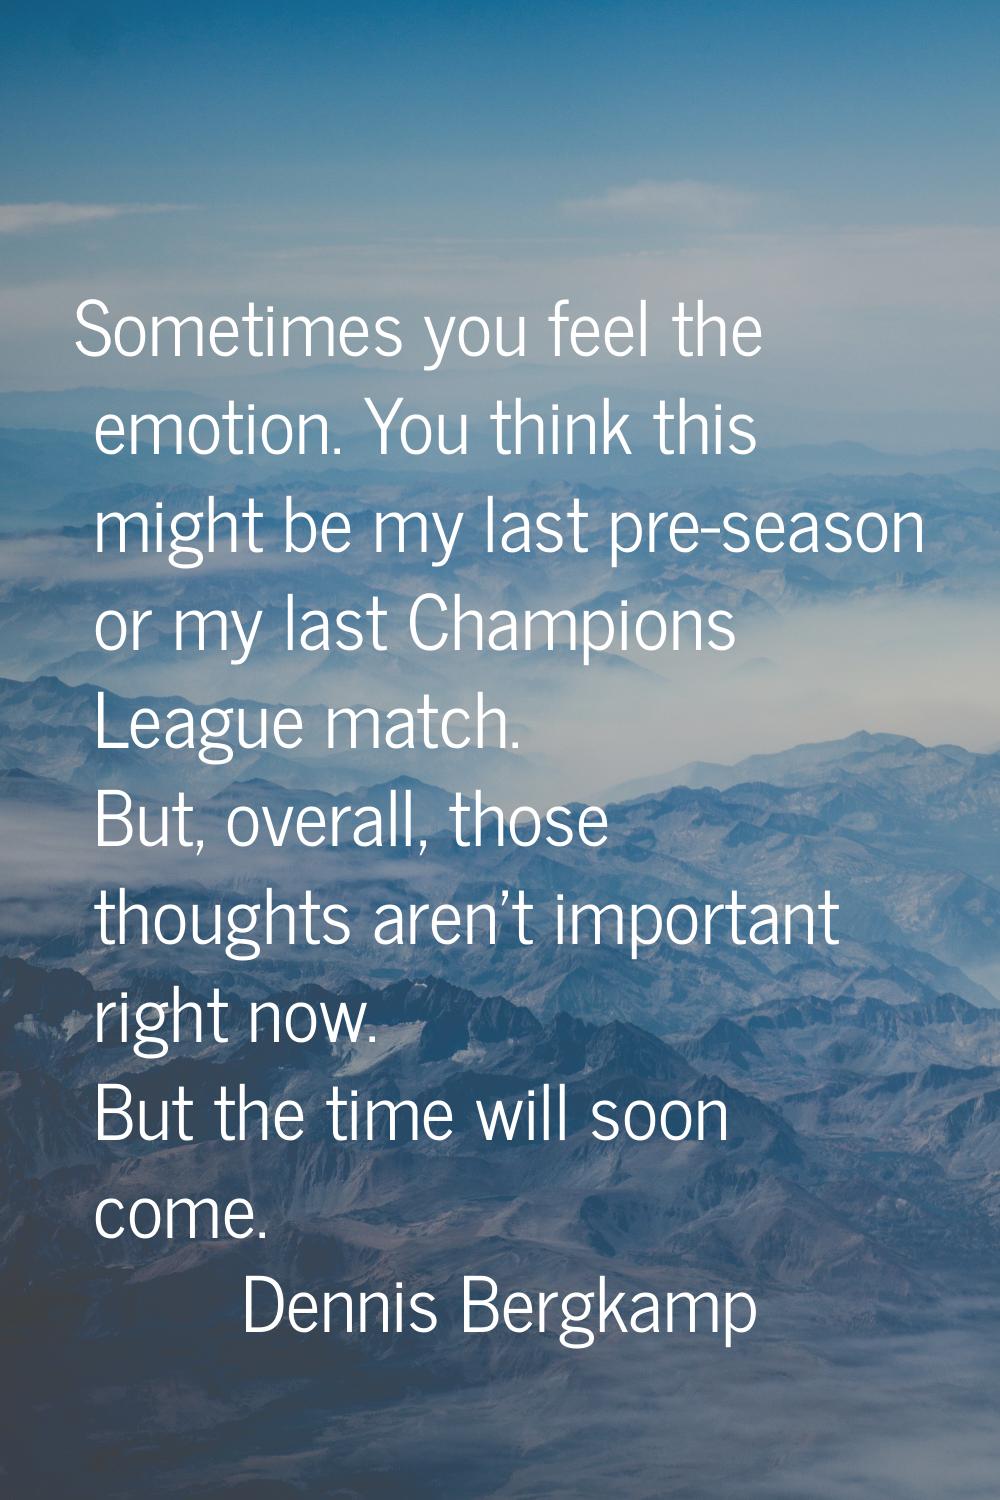 Sometimes you feel the emotion. You think this might be my last pre-season or my last Champions Lea